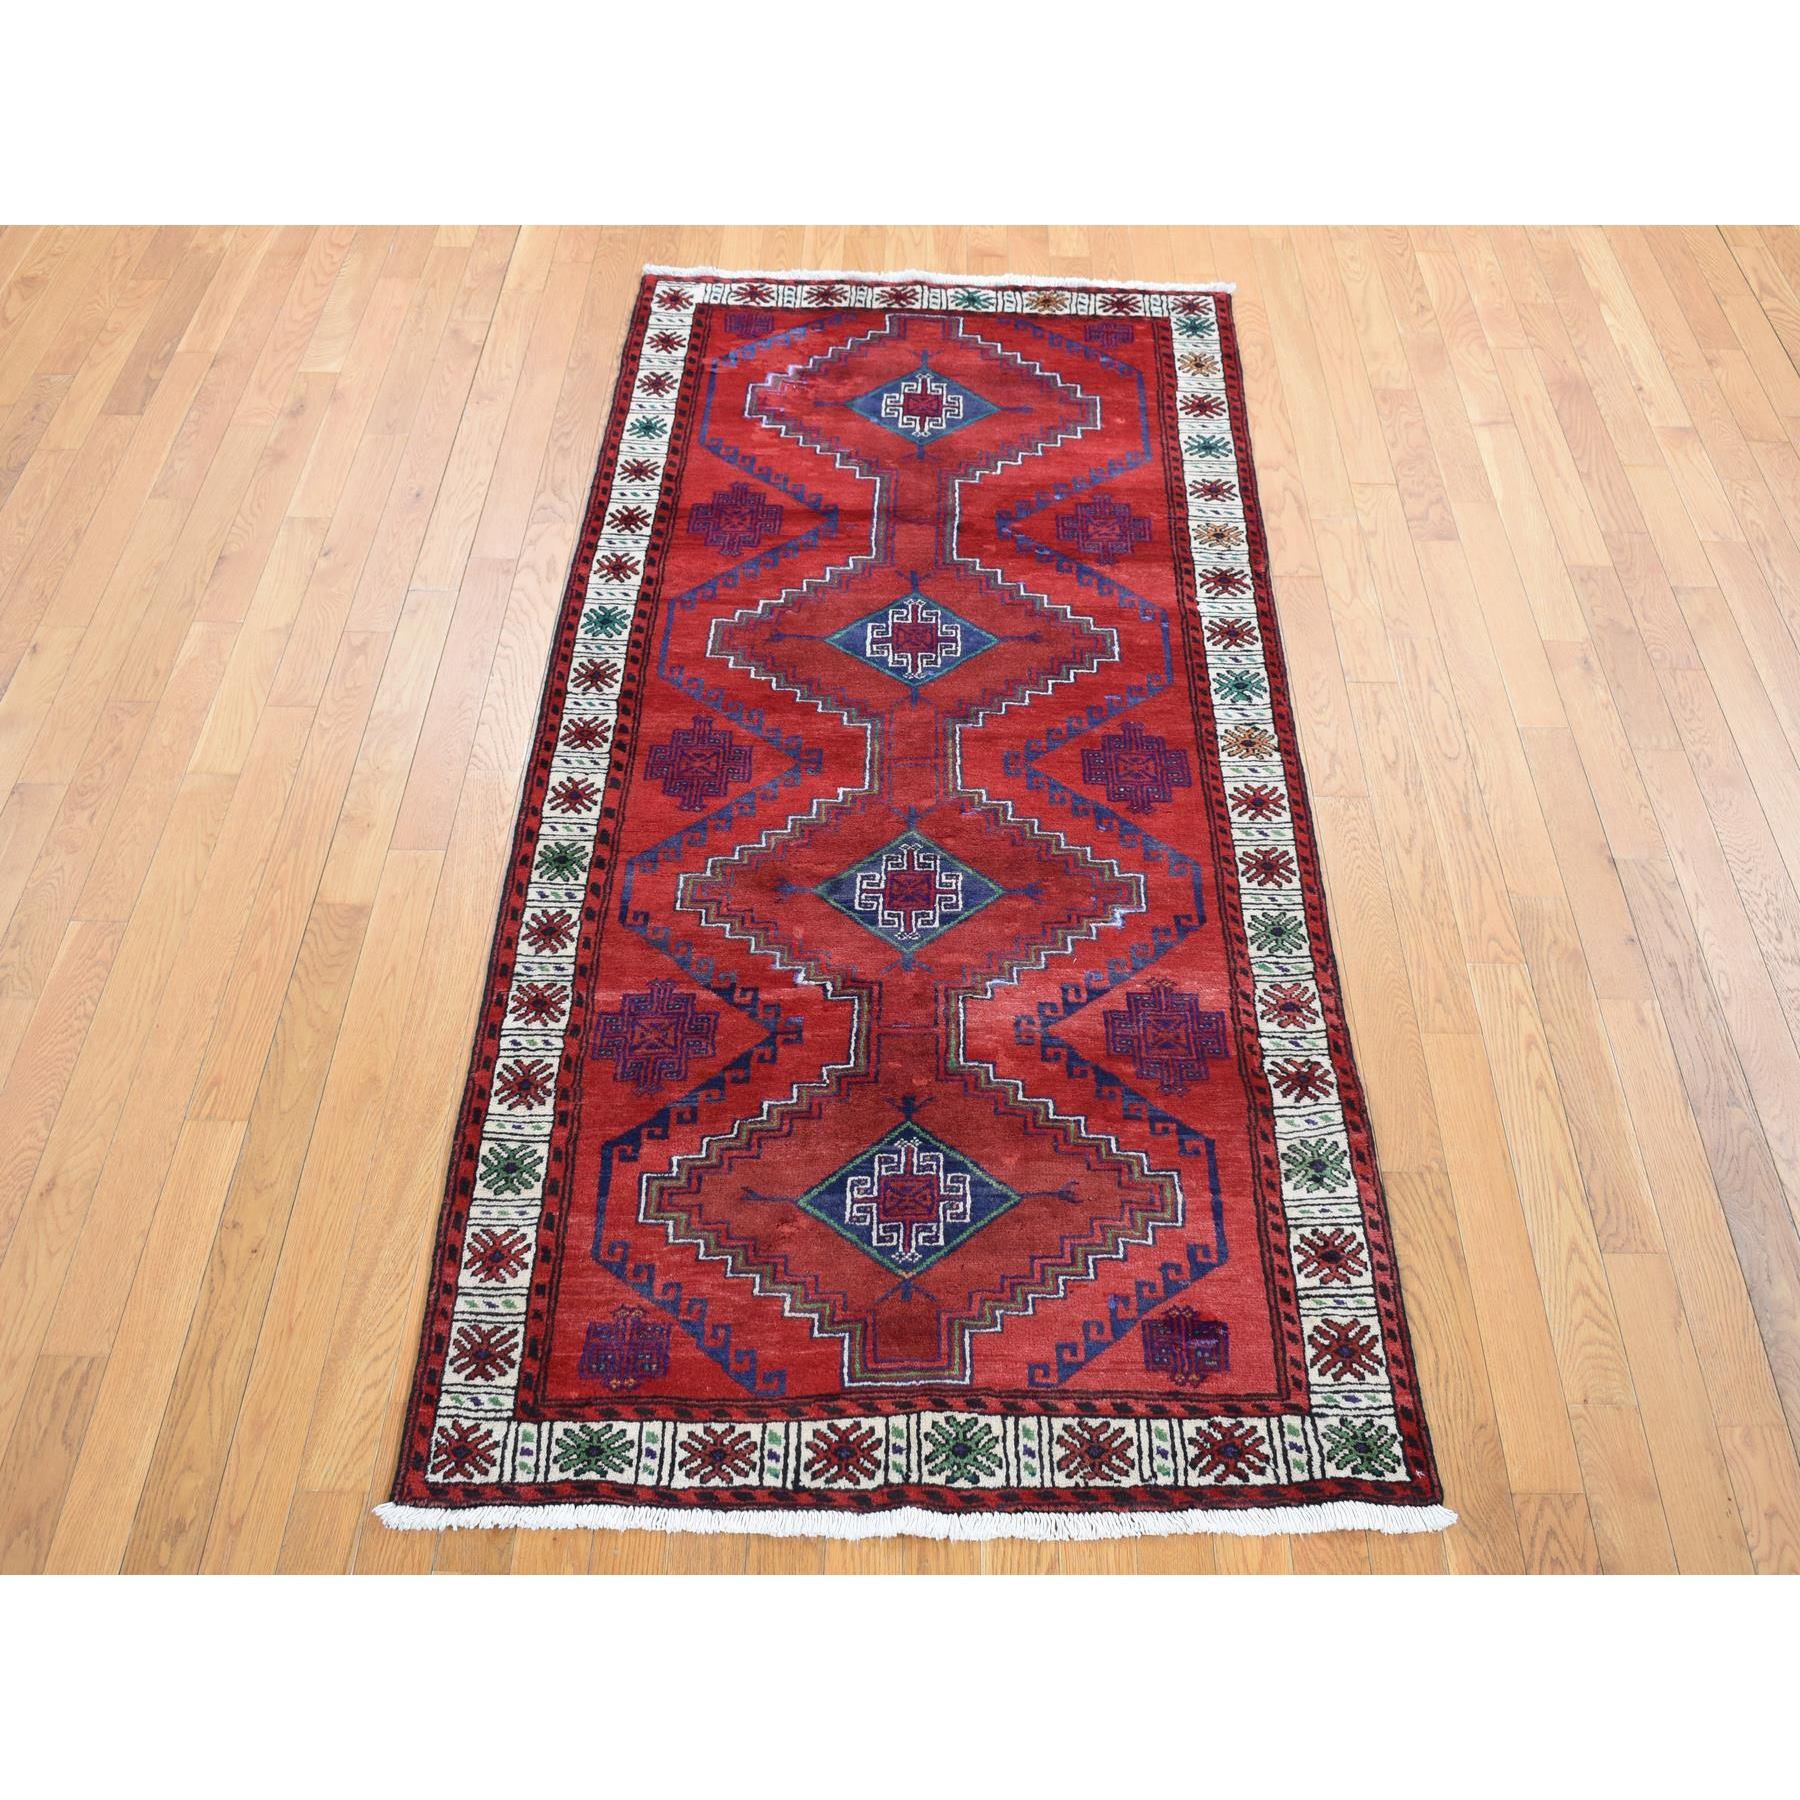 This fabulous Hand-Knotted carpet has been created and designed for extra strength and durability. This rug has been handcrafted for weeks in the traditional method that is used to make
Exact Rug Size in Feet and Inches : 3'8